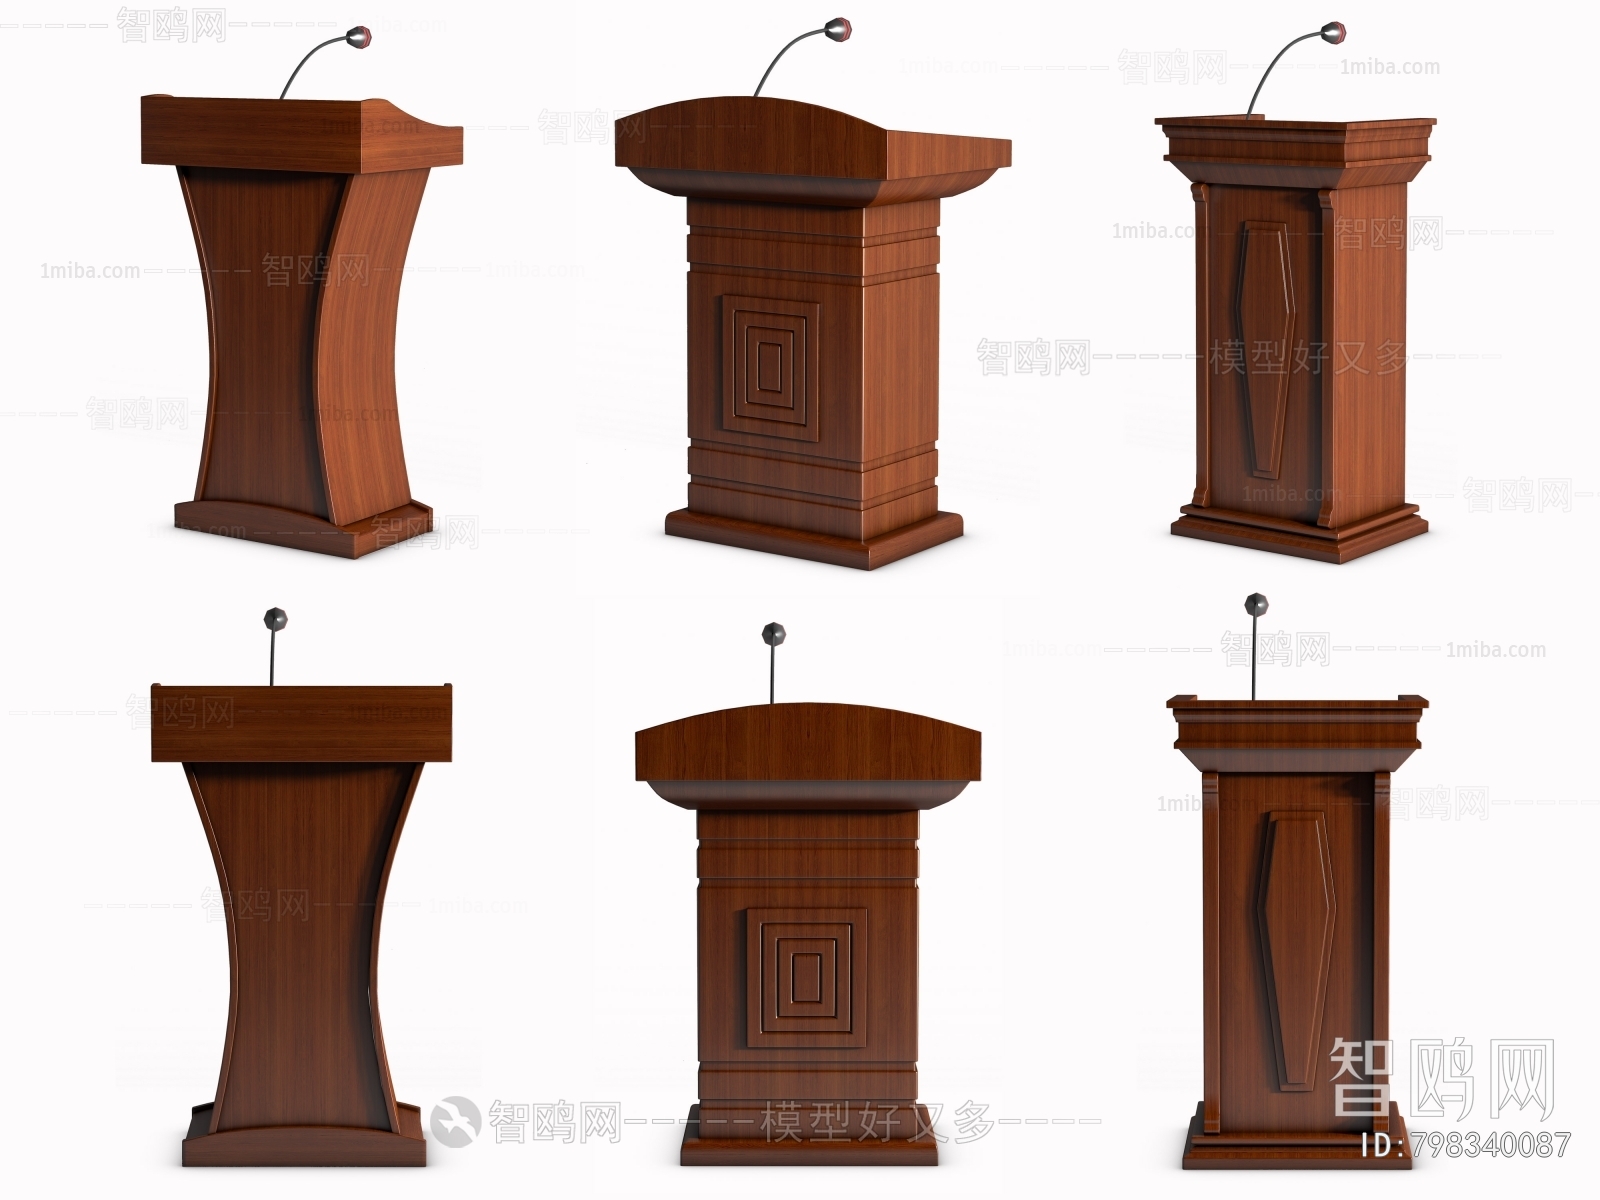 New Chinese Style Rostrum/Lecture Table